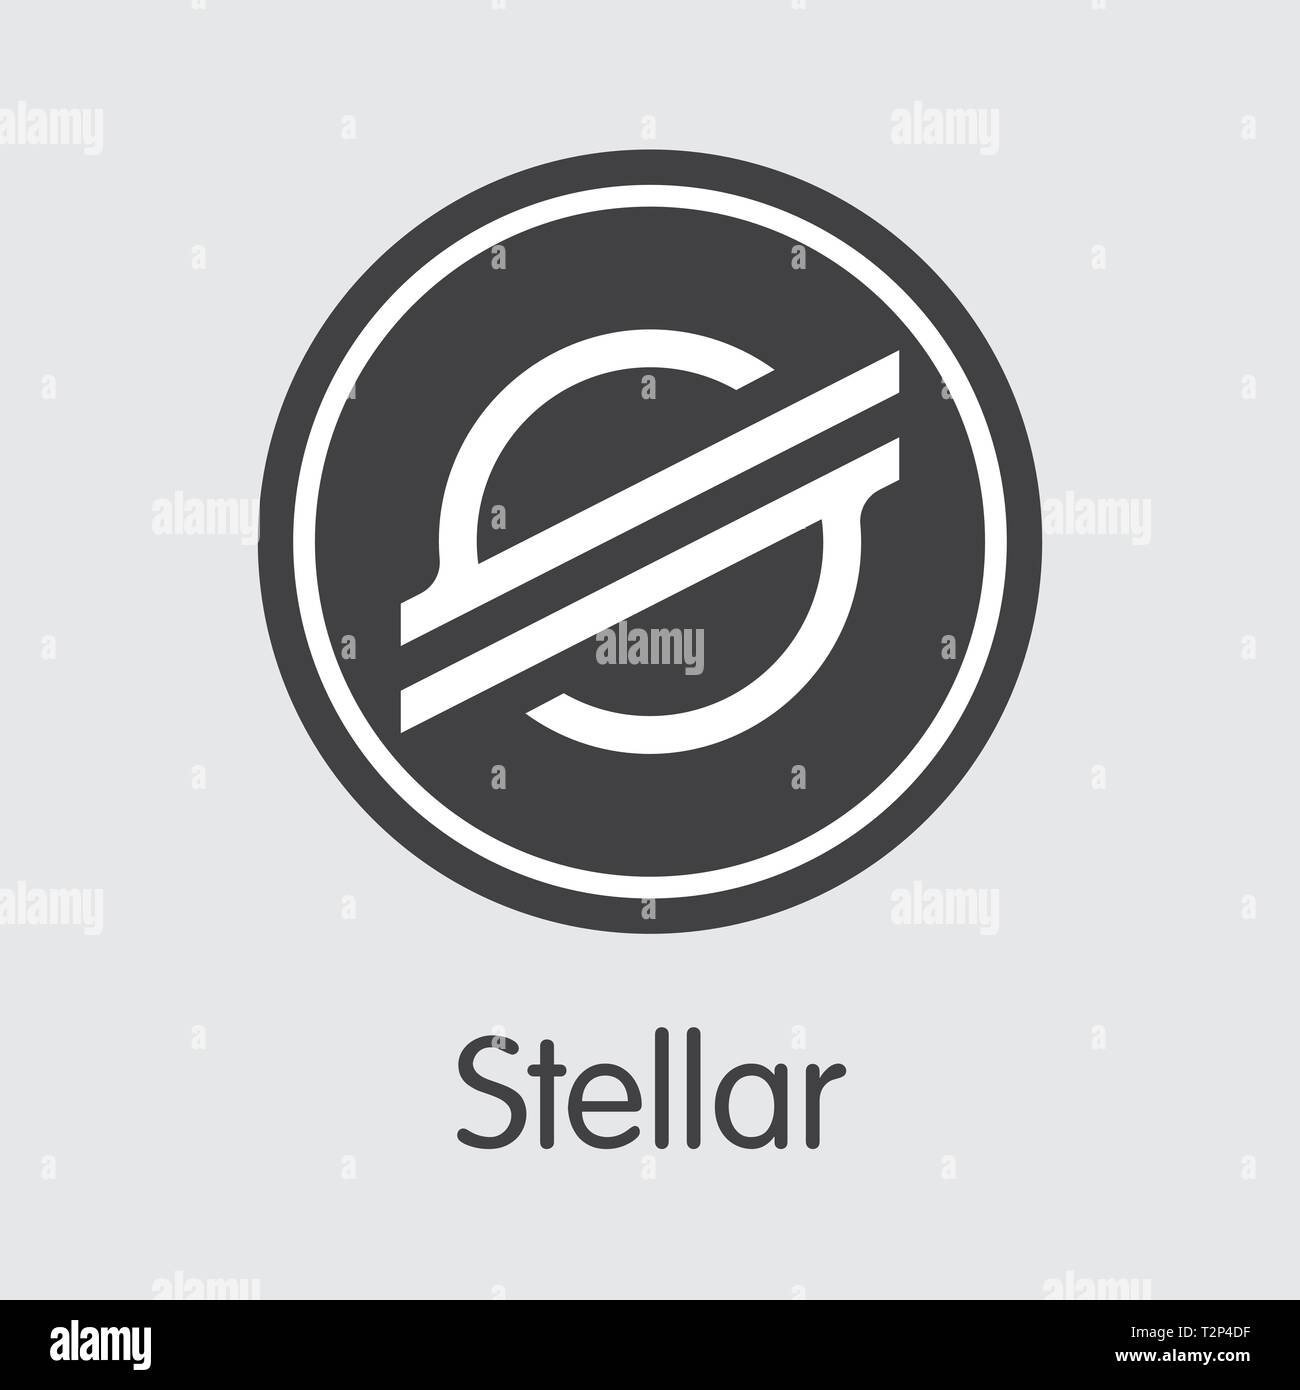 XLM - Stellar. The Icon or Emblem of Crypto Coins, Market Emblem, ICOs Coins and Tokens Icon. Stock Vector